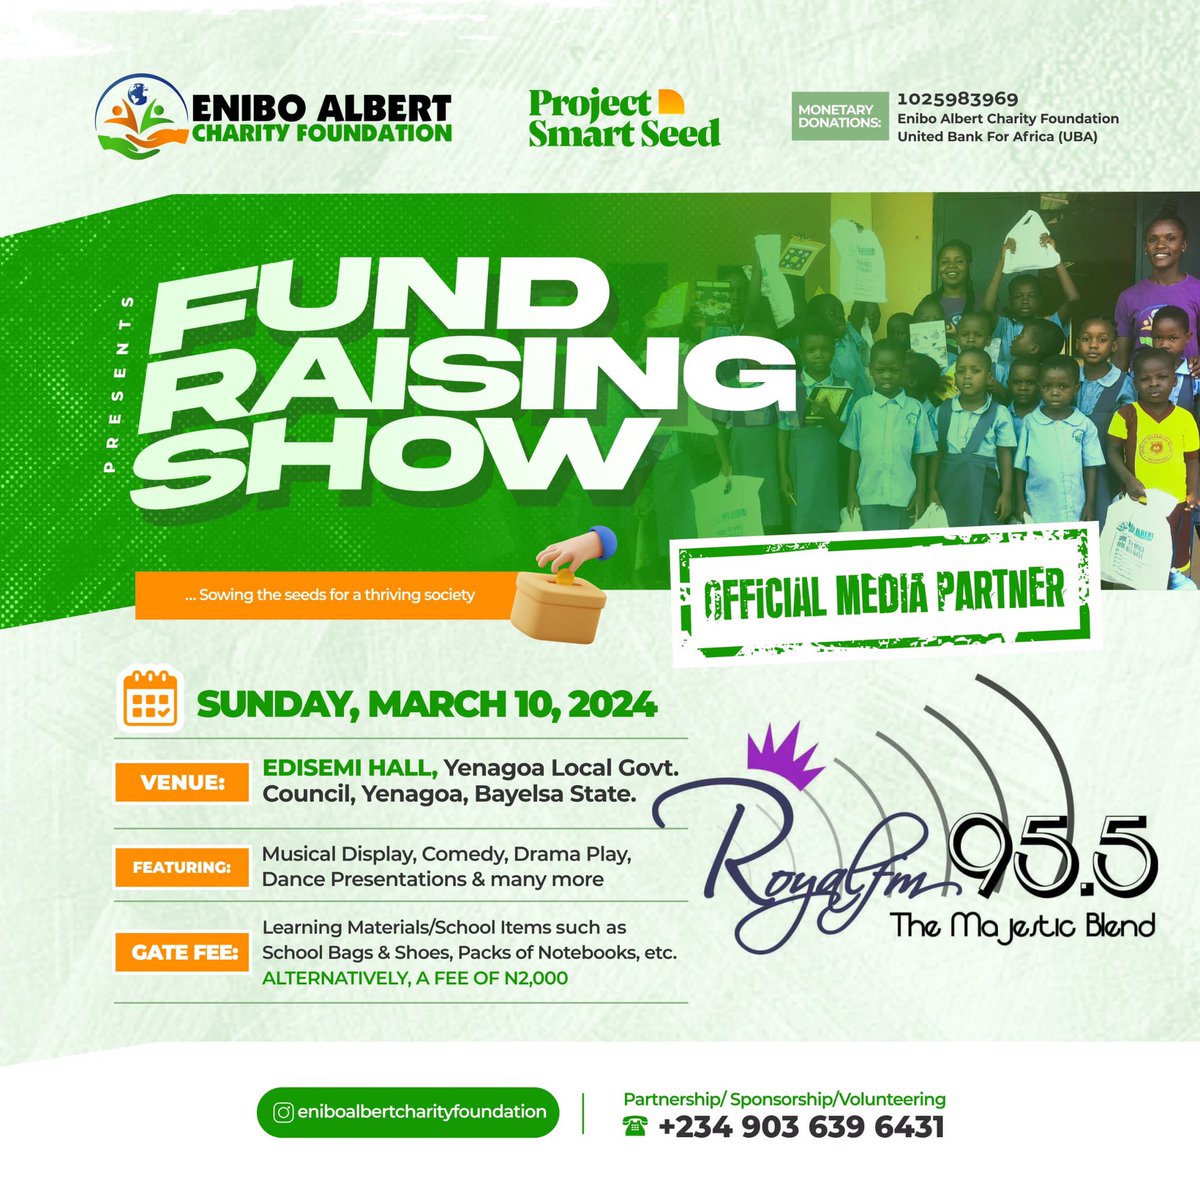 Royal FM 95.5 collaborates with Enibo Albert Charity Foundation for Project Smart Seed Fund Raising Show.

#underprivilegedchildren #backtoschool #makingadifference #educationmatters #togetherwecan #givingback #projectsmartseedshow #sdg4qualityeducation #BasicEducation